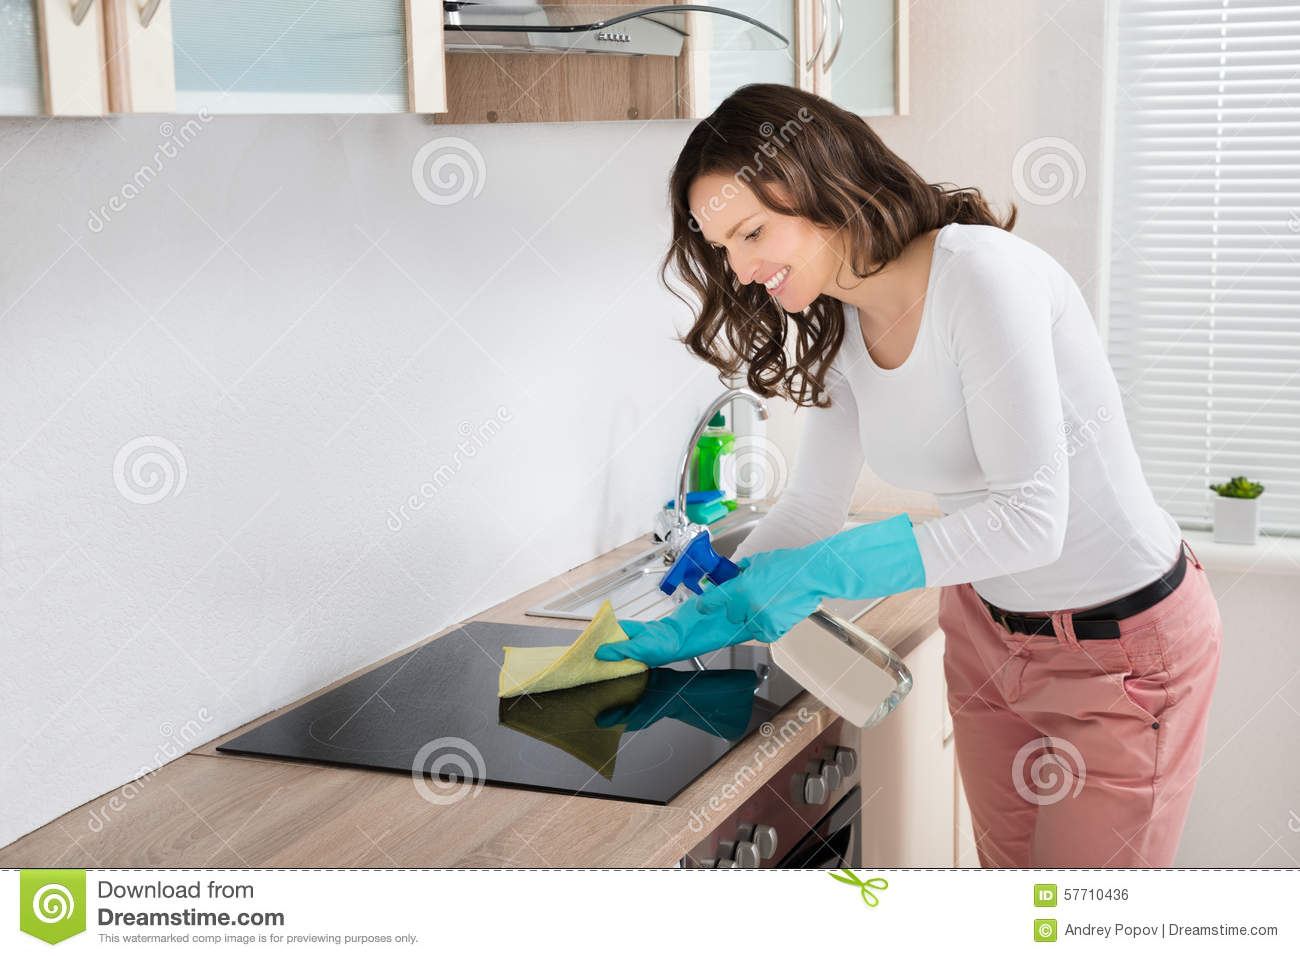 Young Woman Smiling While Cleaning Induction Hob On Countertop At Home